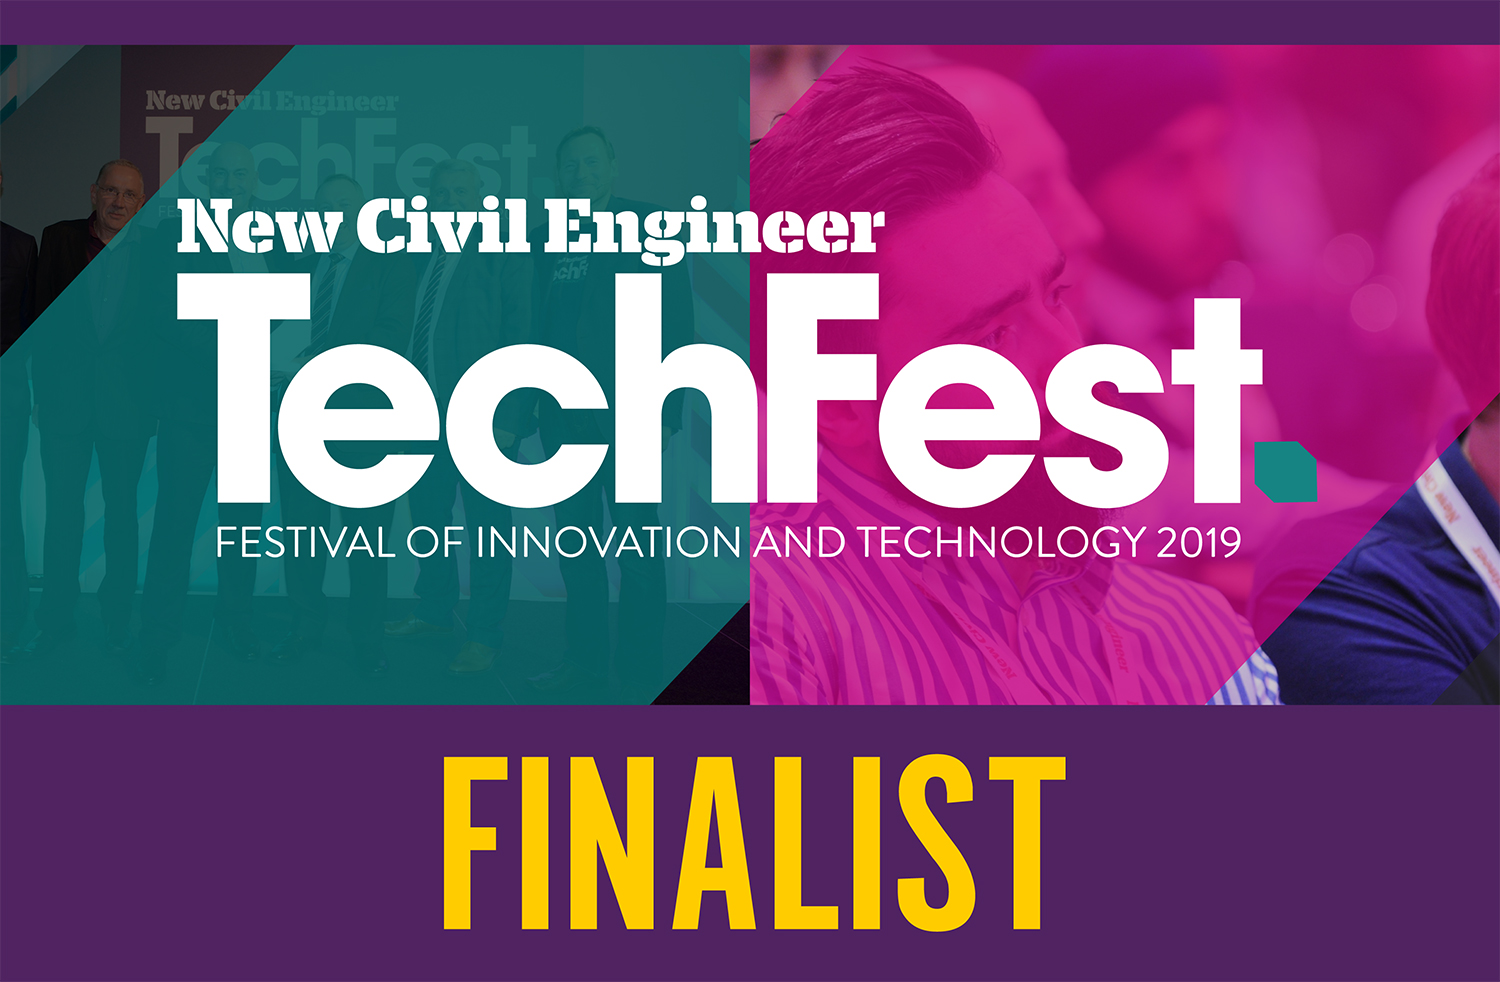 BaseStone nominated as Software Solution Provider of the Year for New Civil Engineer’s TechFest 2019. Award